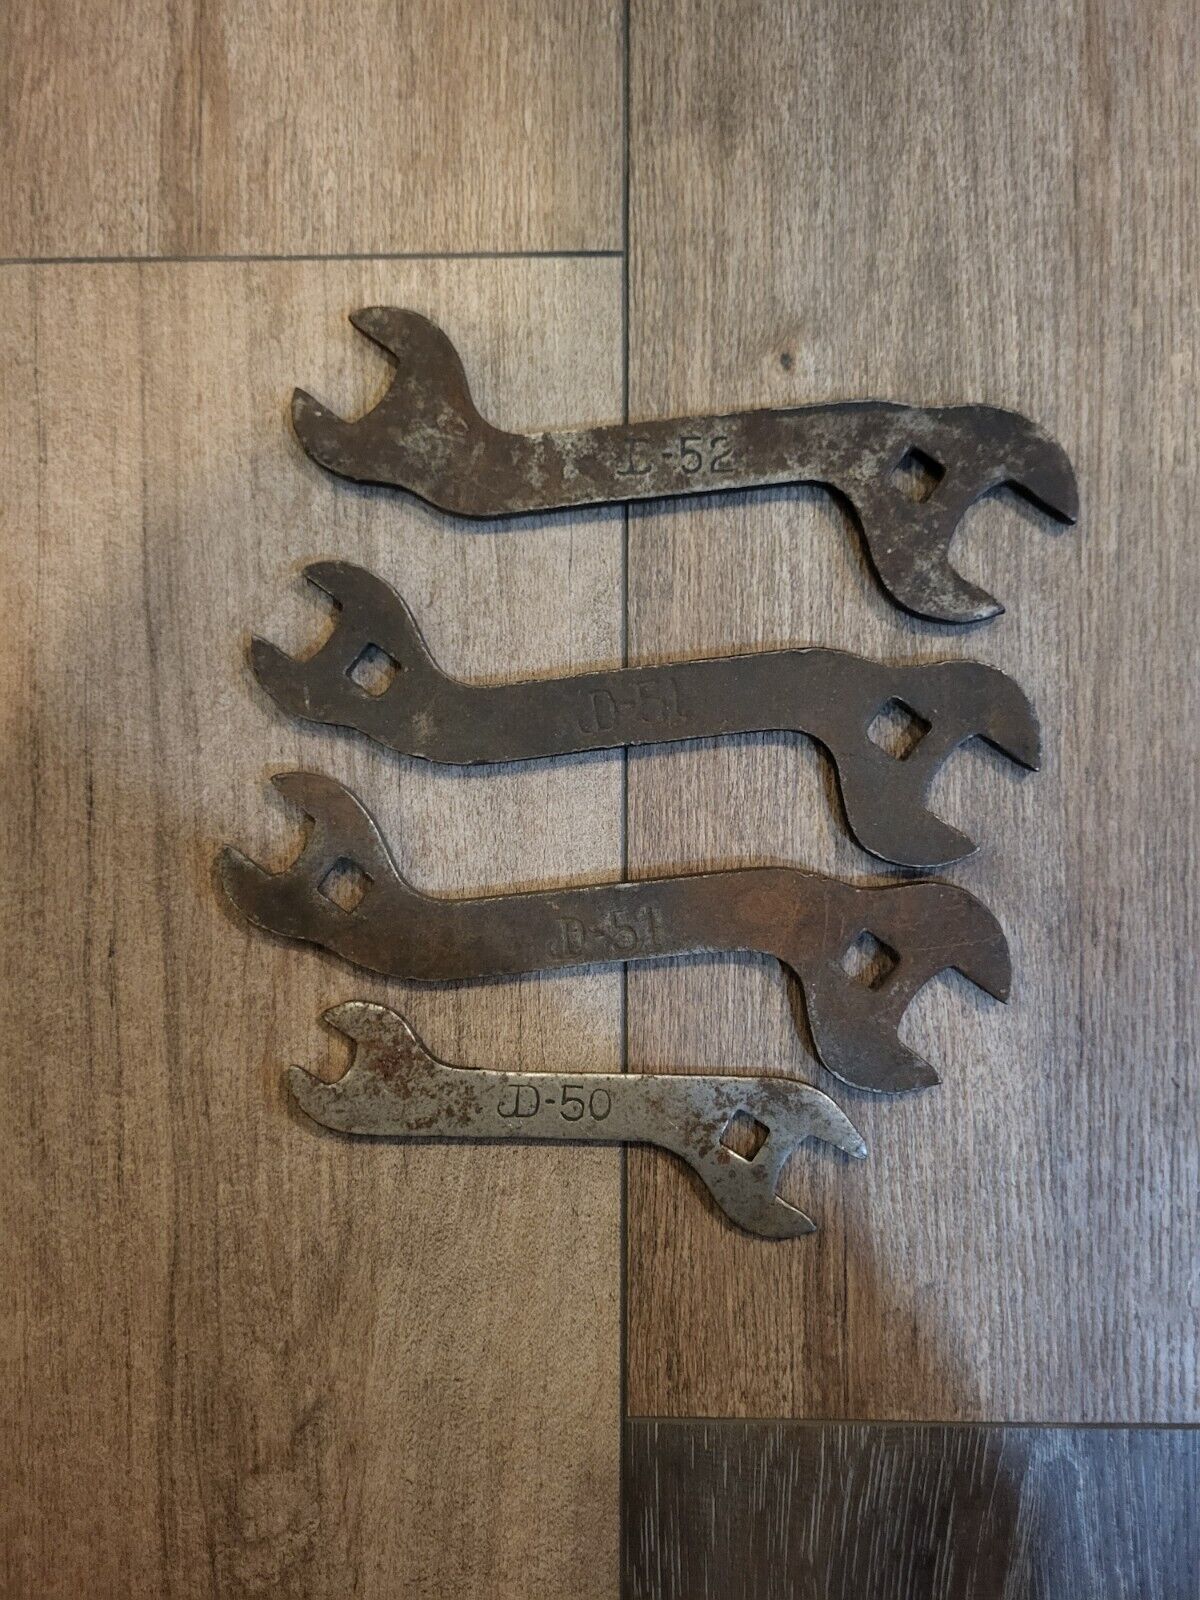 LOT OF 4 VINTAGE ANTIQUE JOHN DEERE JD-50, 51, 51, AND 52 FARM IMPLEMENT WRENCHS